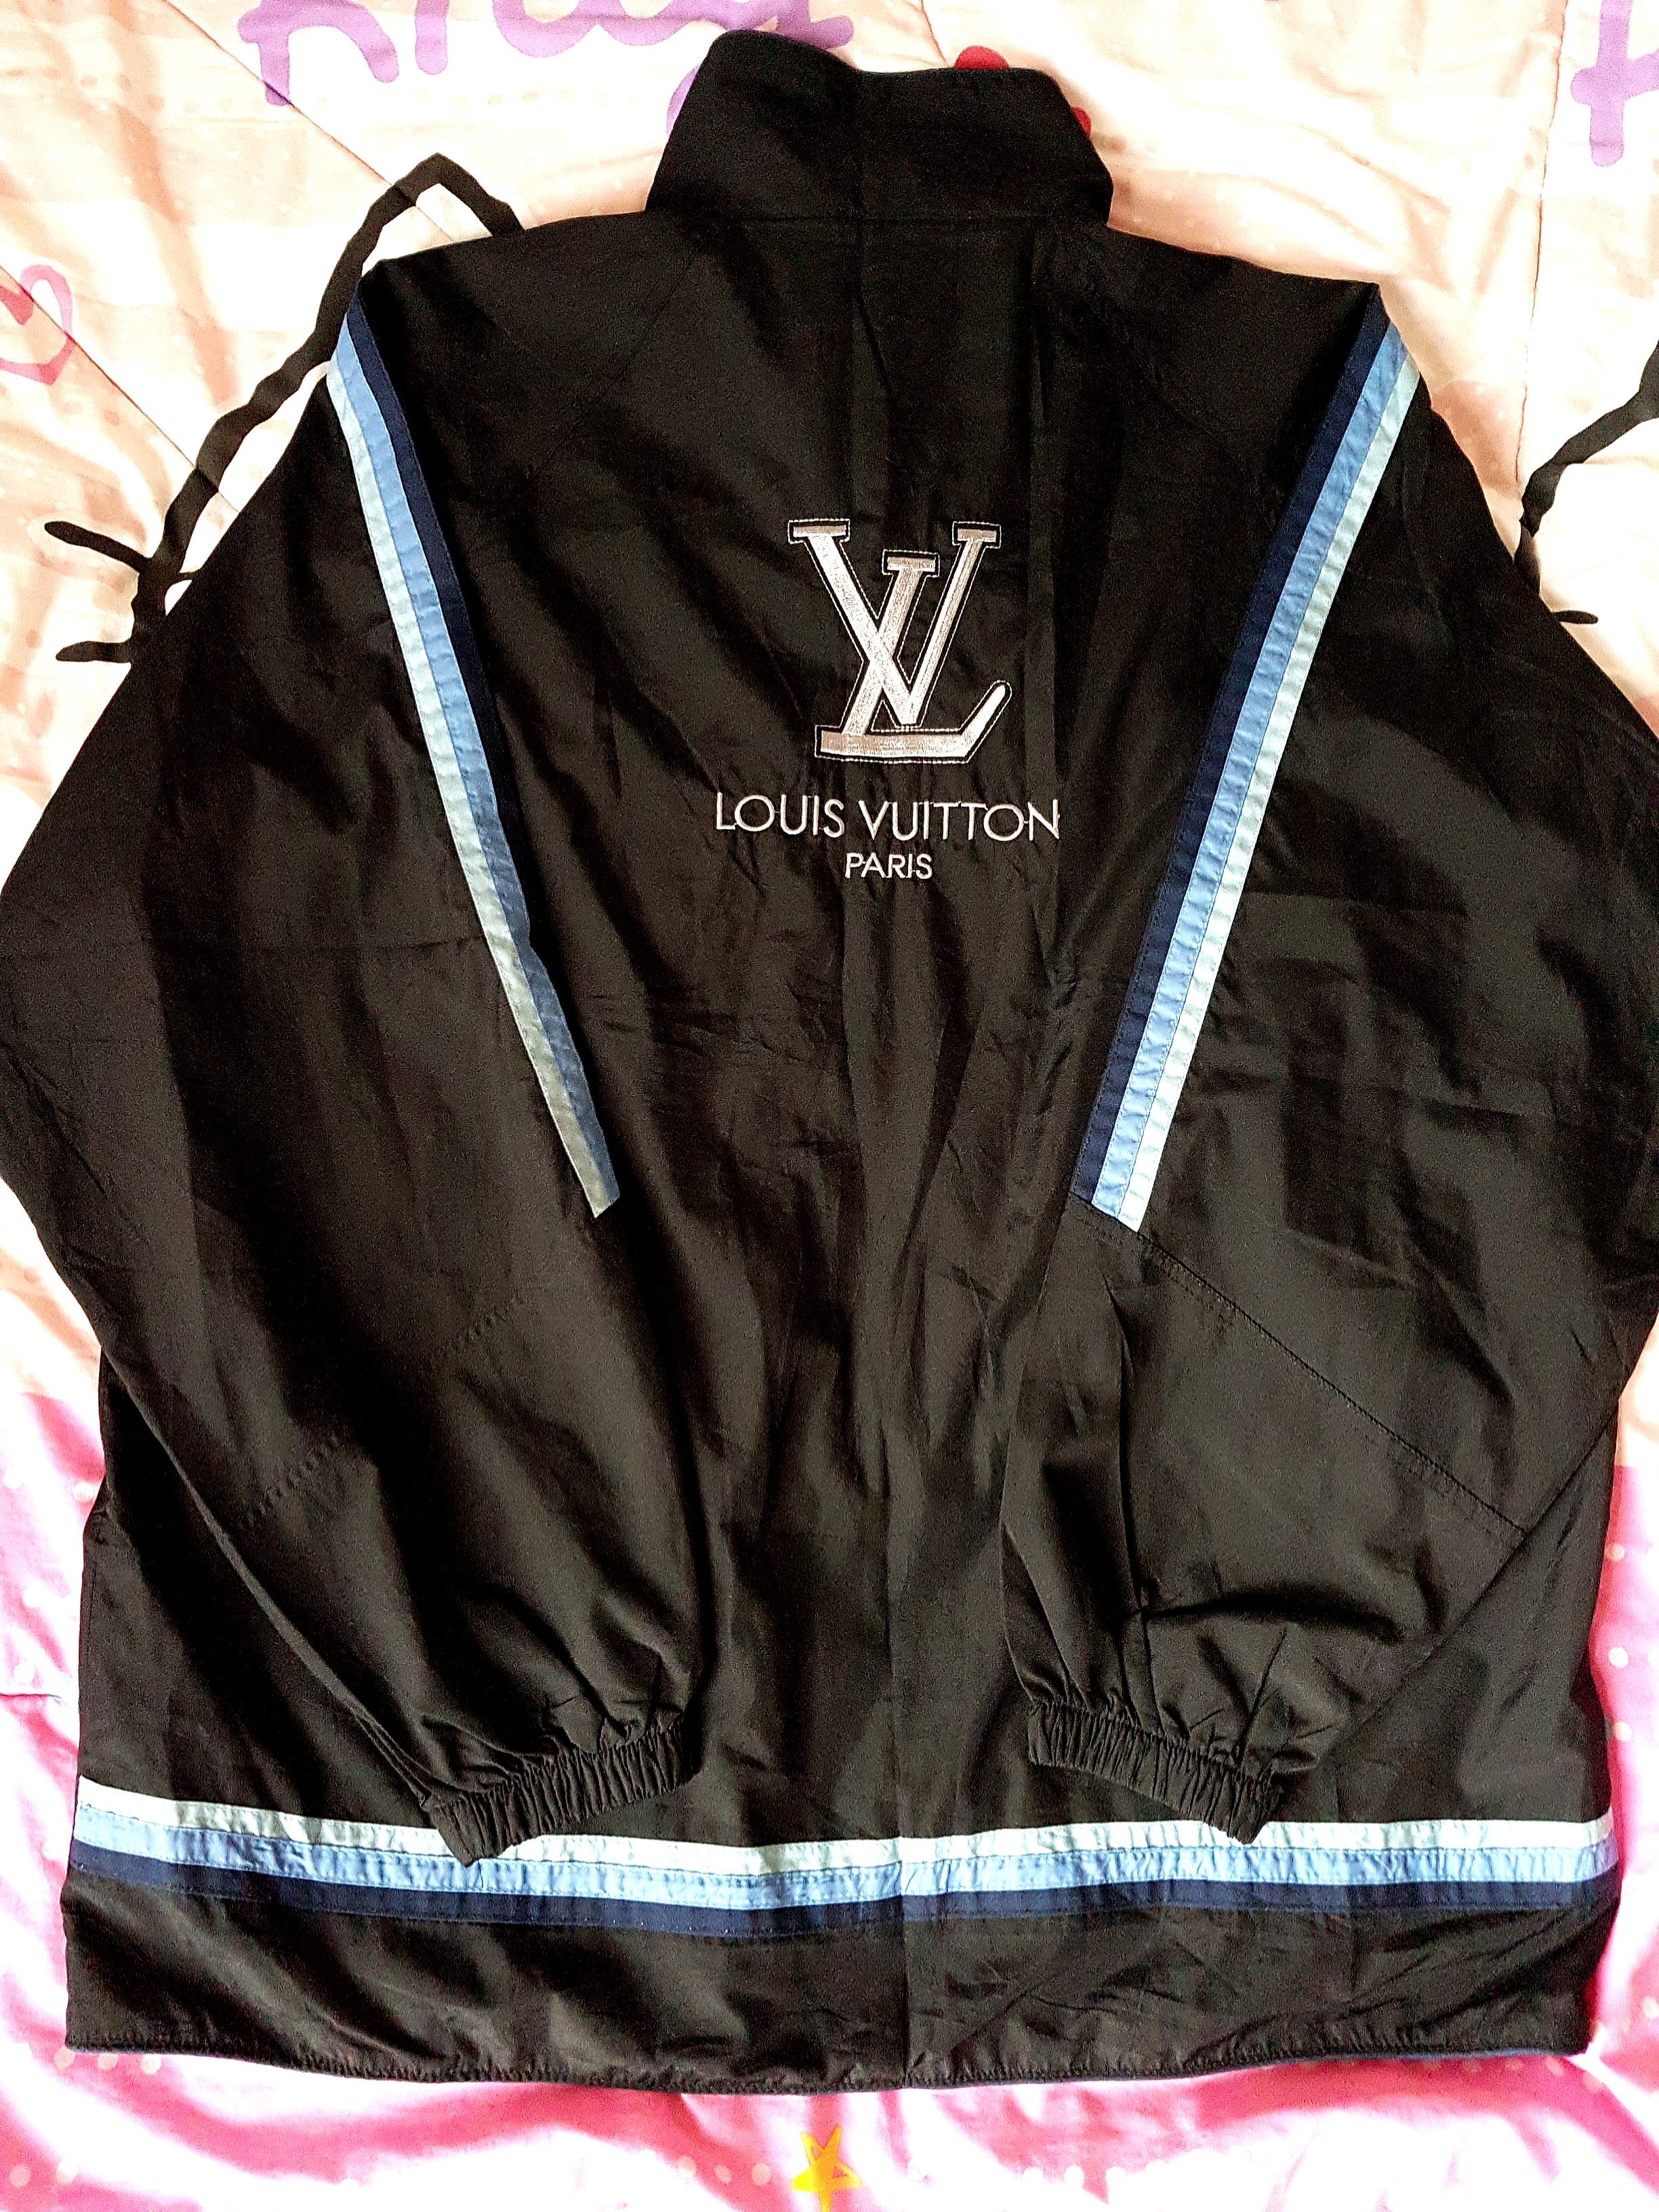 Vintage LV Louis Vuitton Windbreaker Jacket., Men's Fashion, Coats, Jackets  and Outerwear on Carousell